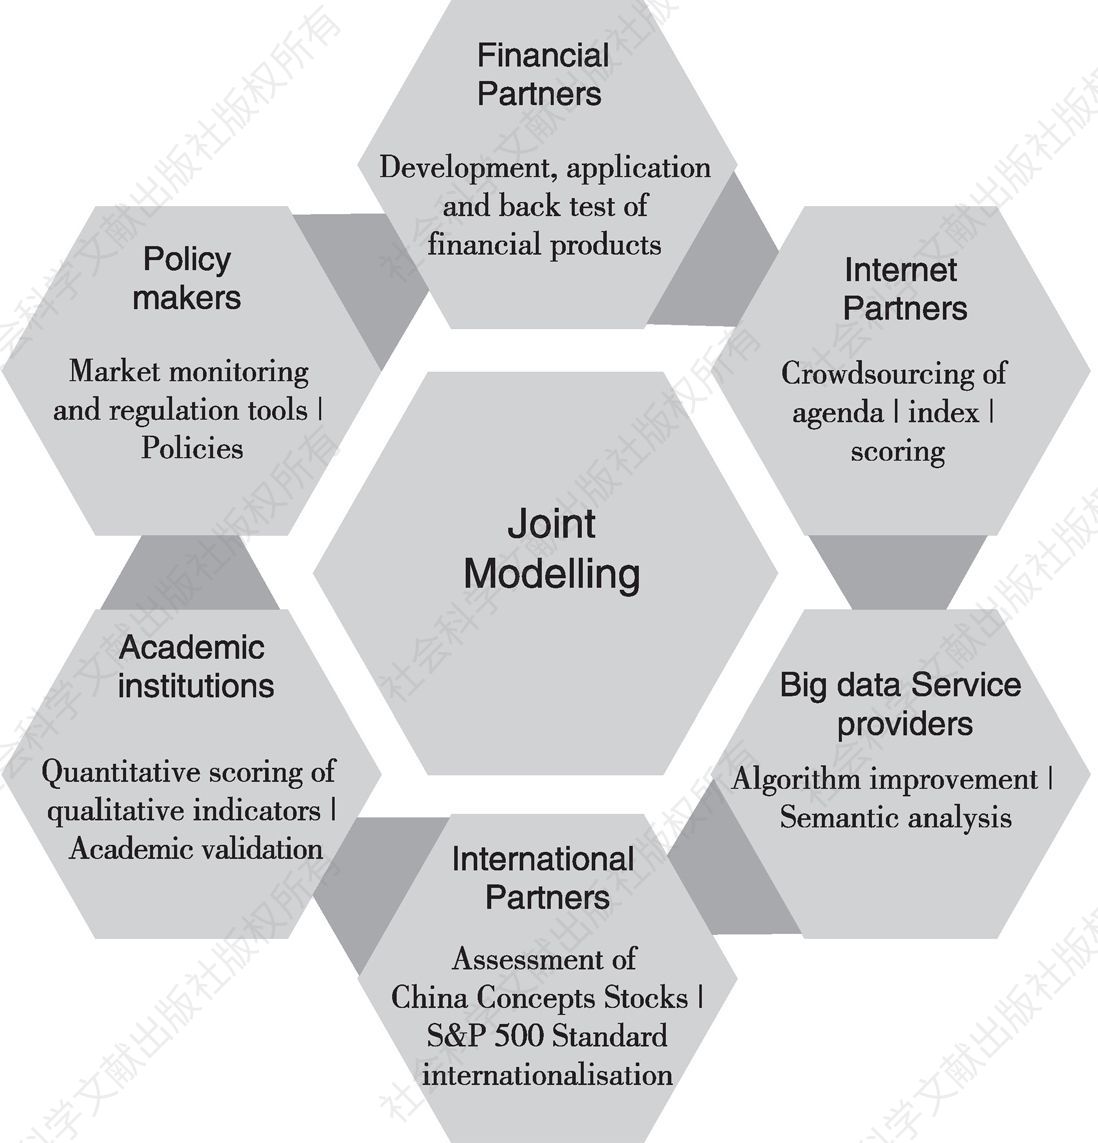 Figure 1.4 Joint Modelling by Stakeholders